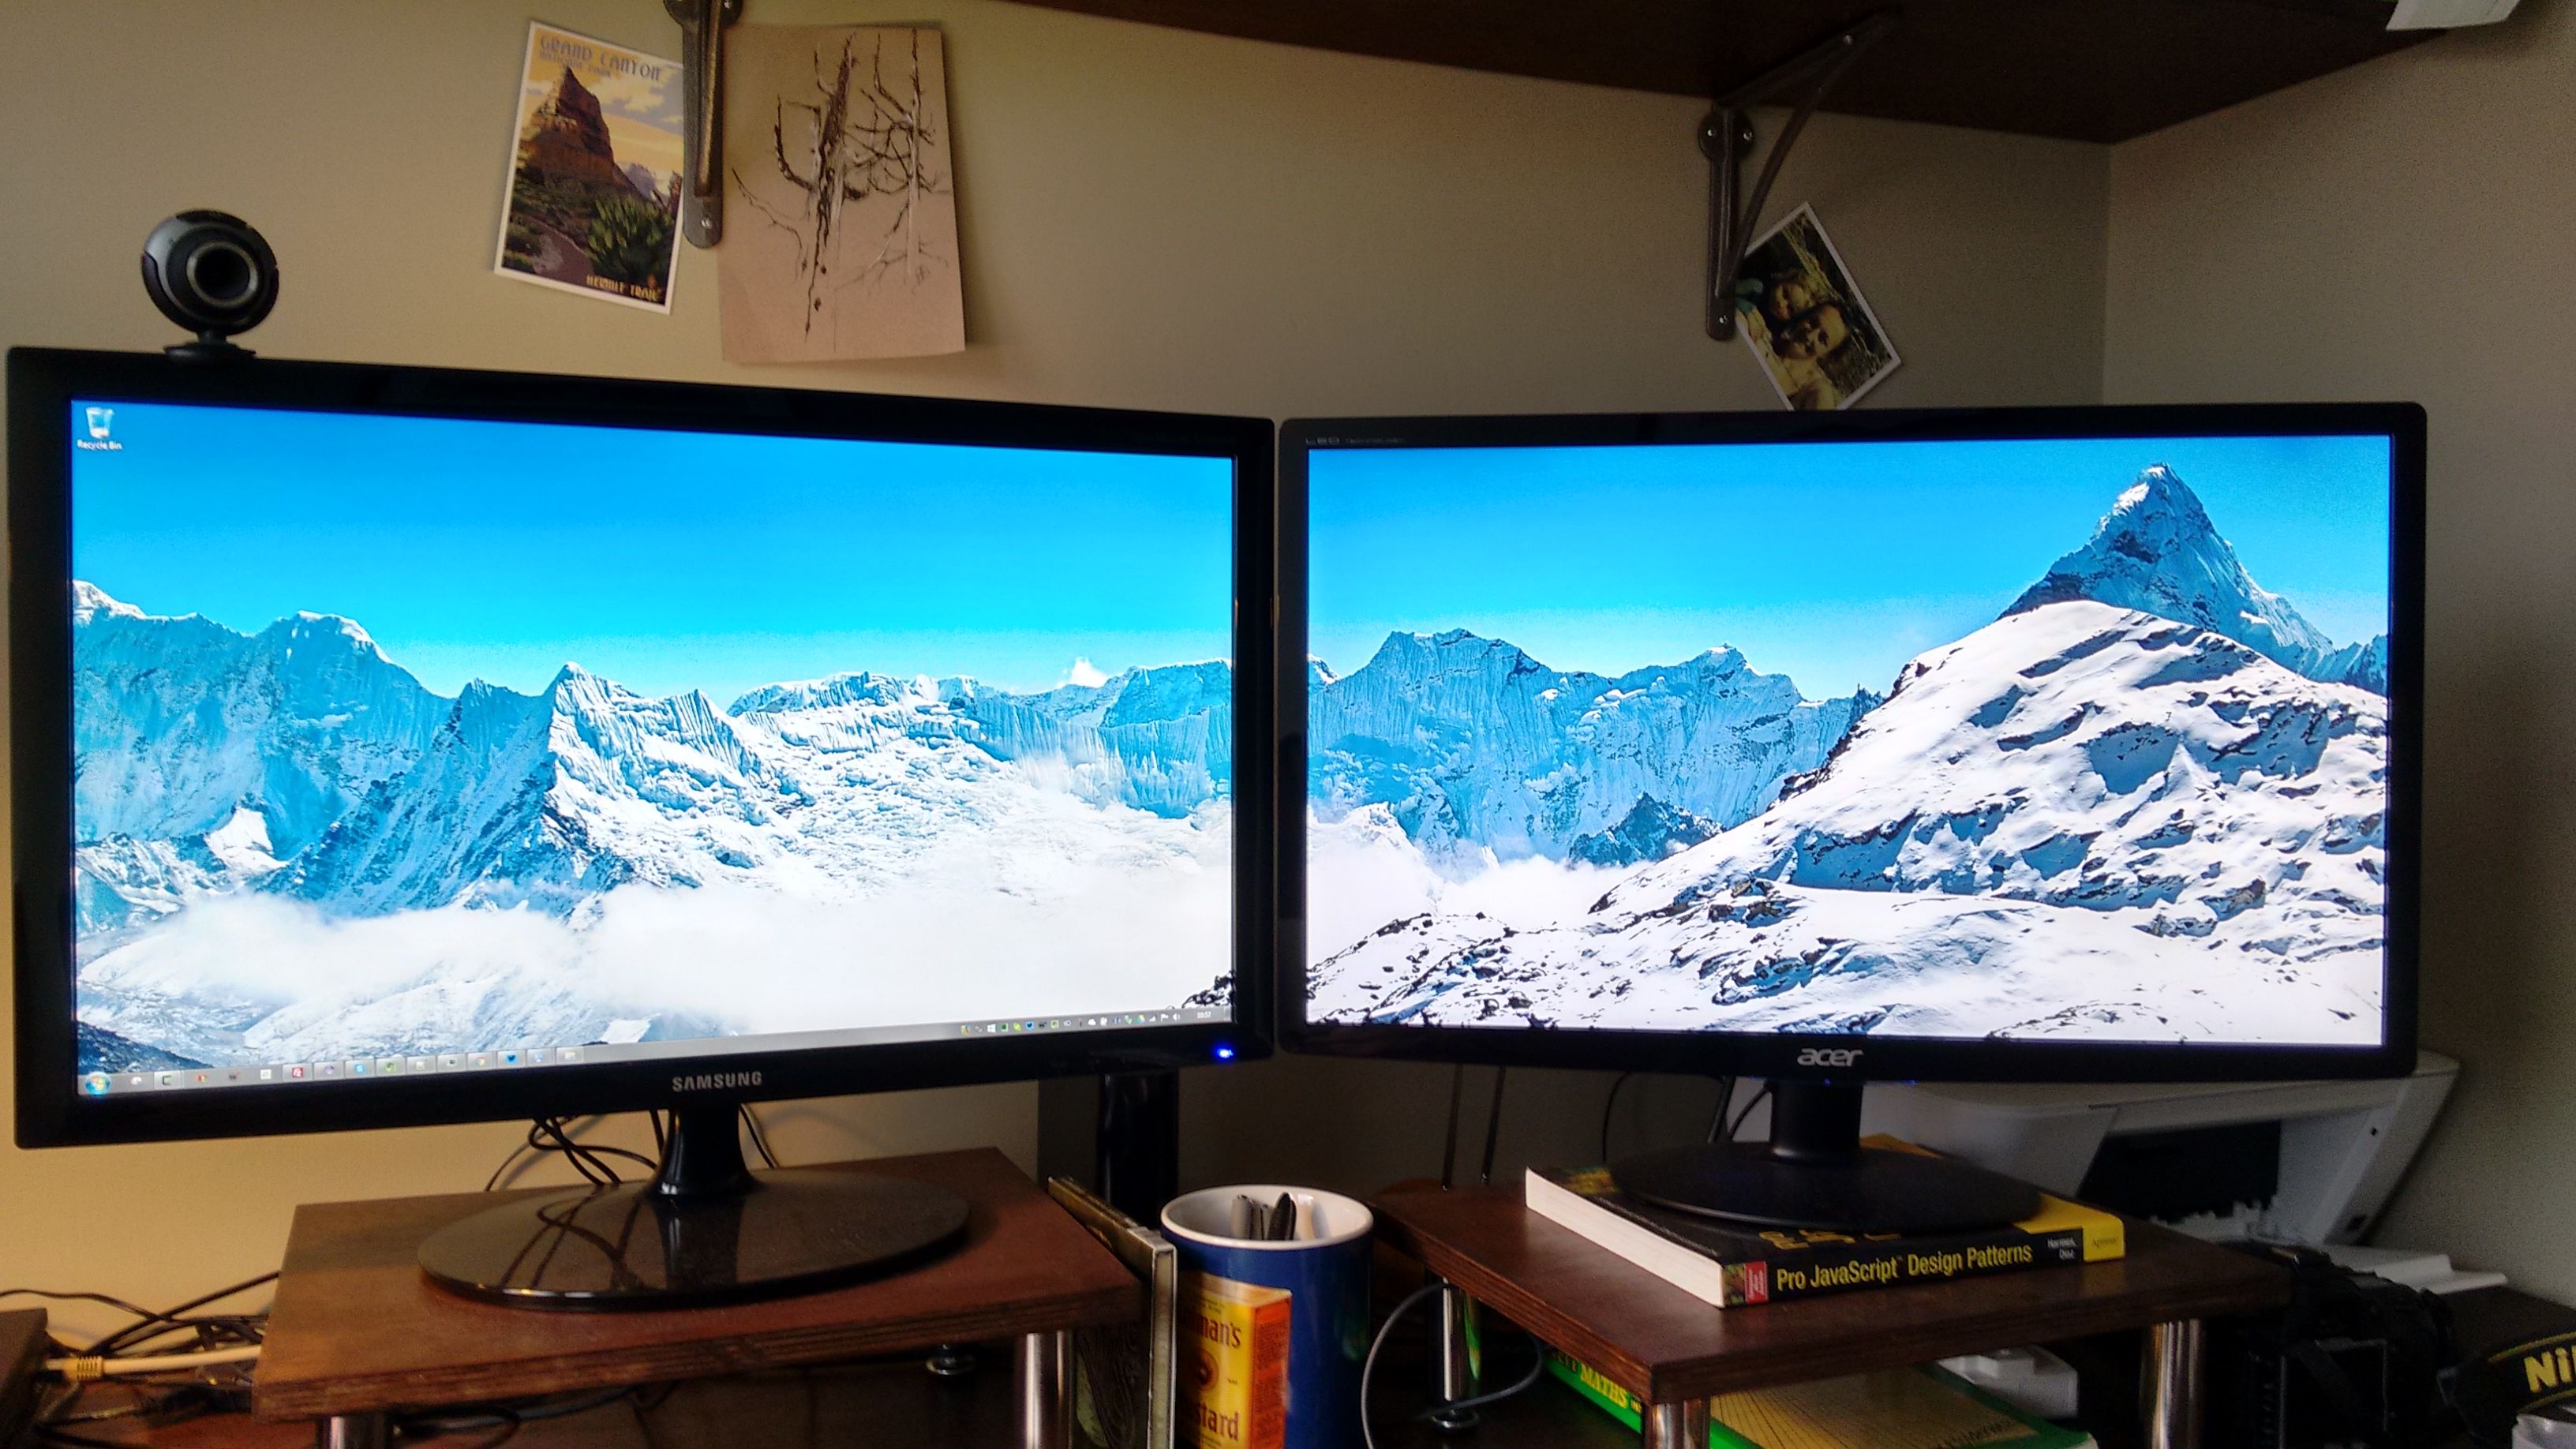 Stretching wallpaper across dual monitors with Windows 7